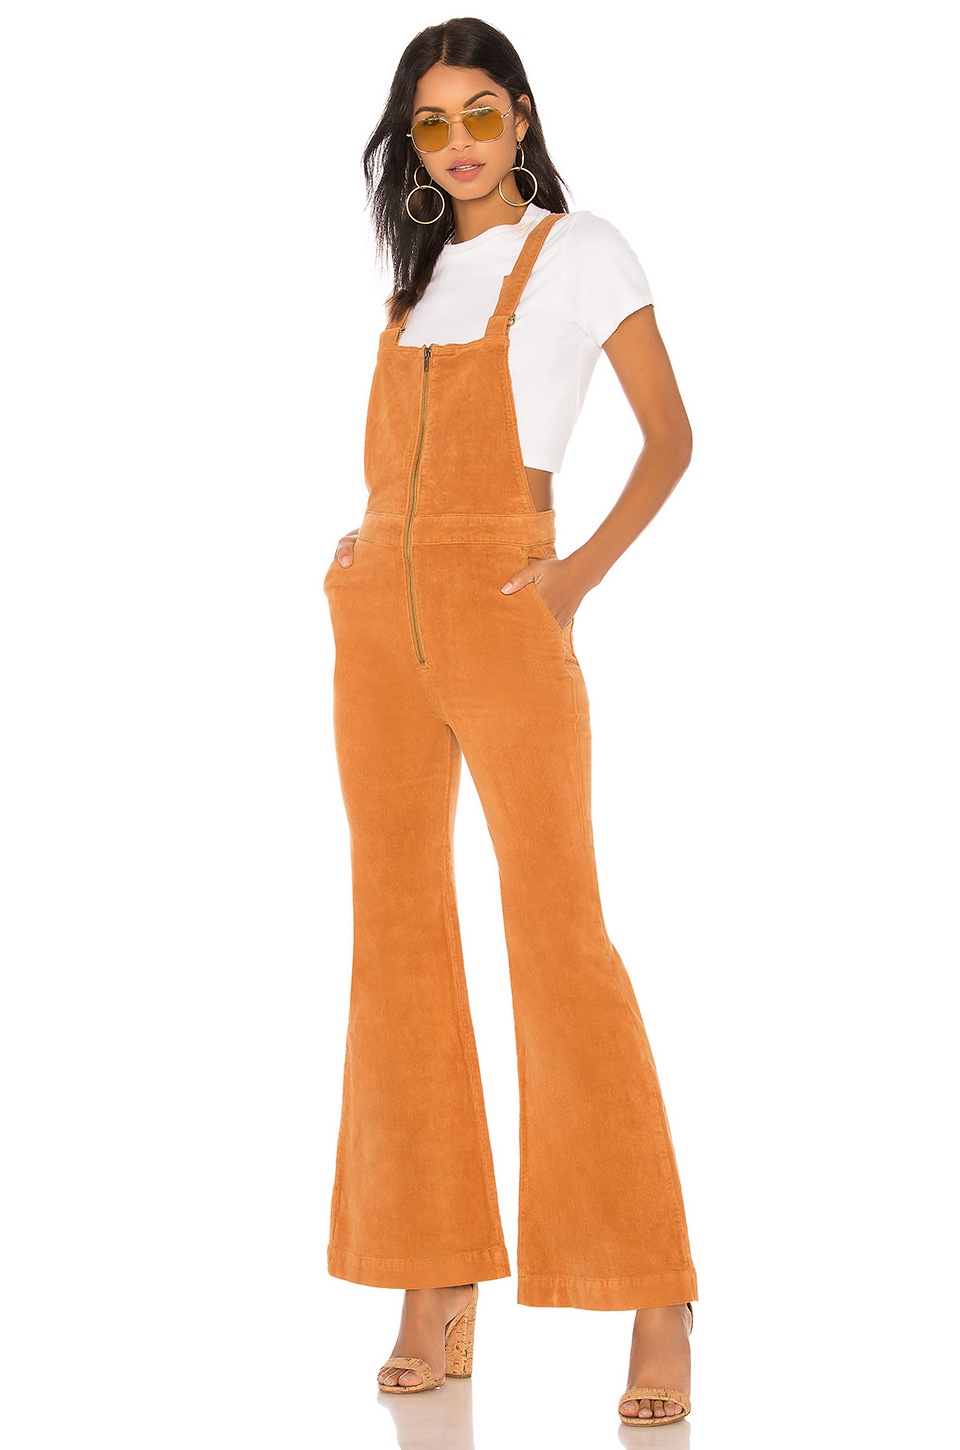 ROLLA'S EASTCOAST FLARE OVERALL